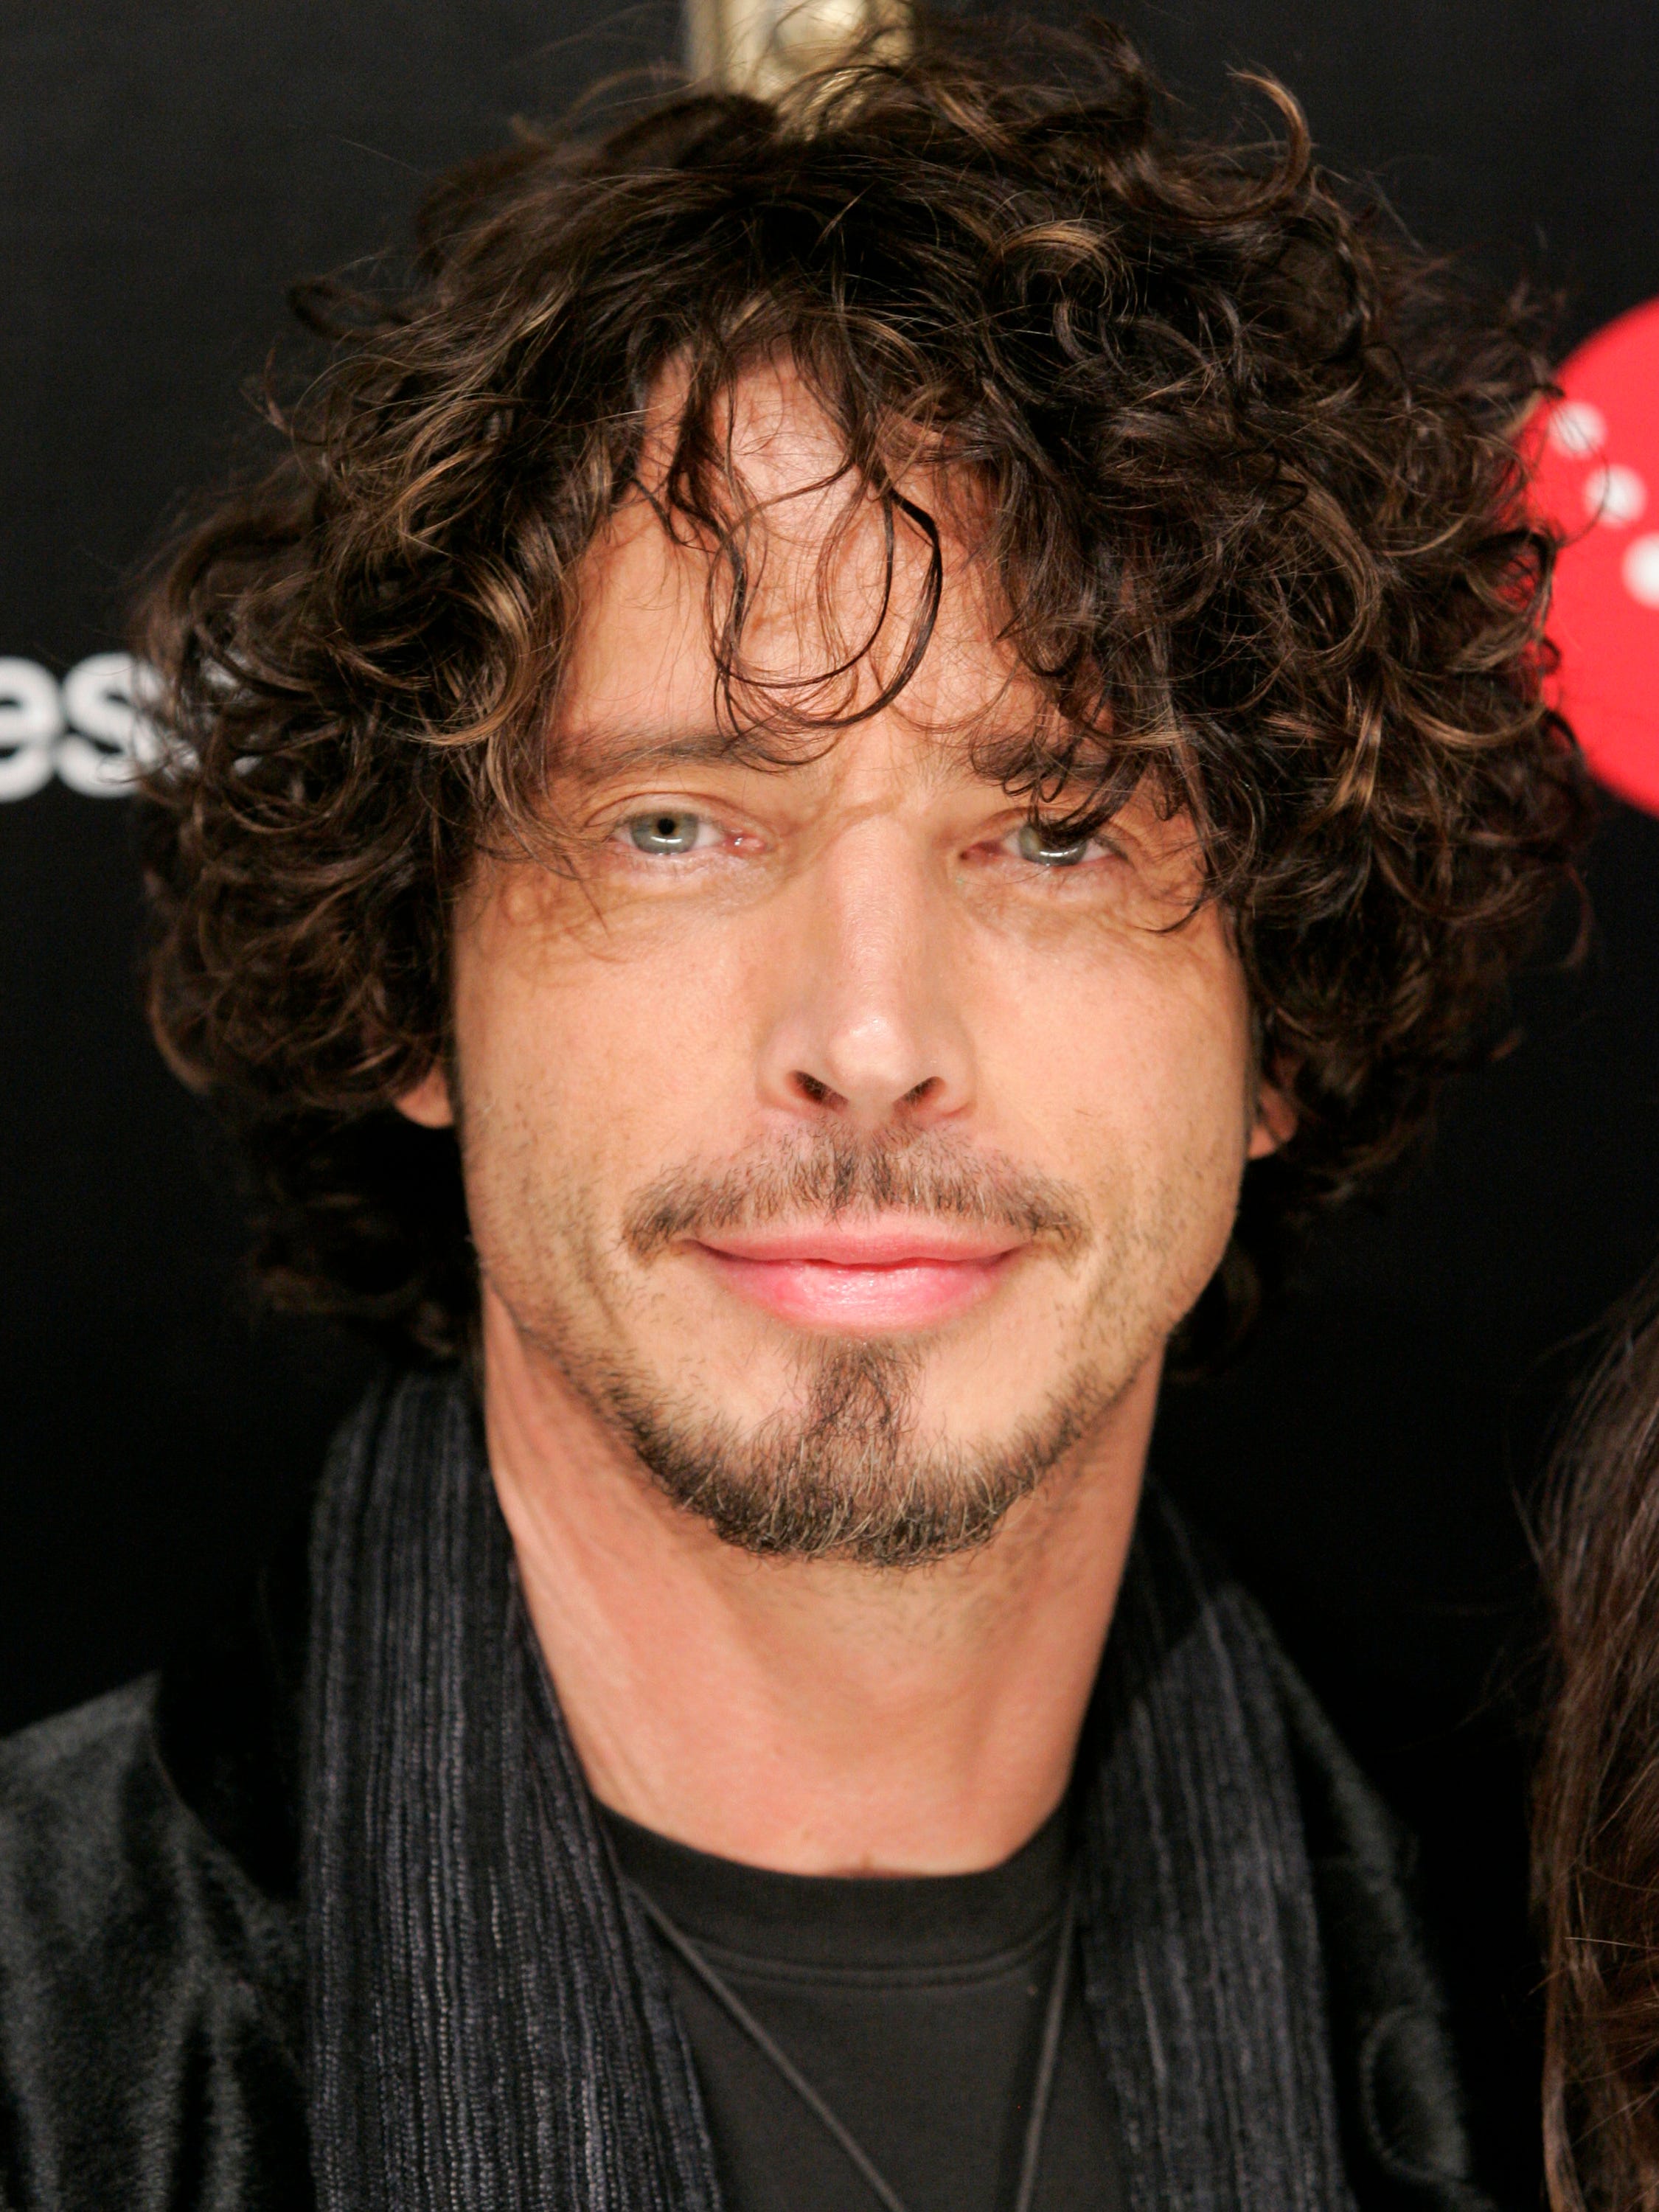 Singer Chris Cornell poses on the press line at a party honoring Timbaland in Los Angeles, Feb. 8, 2008.